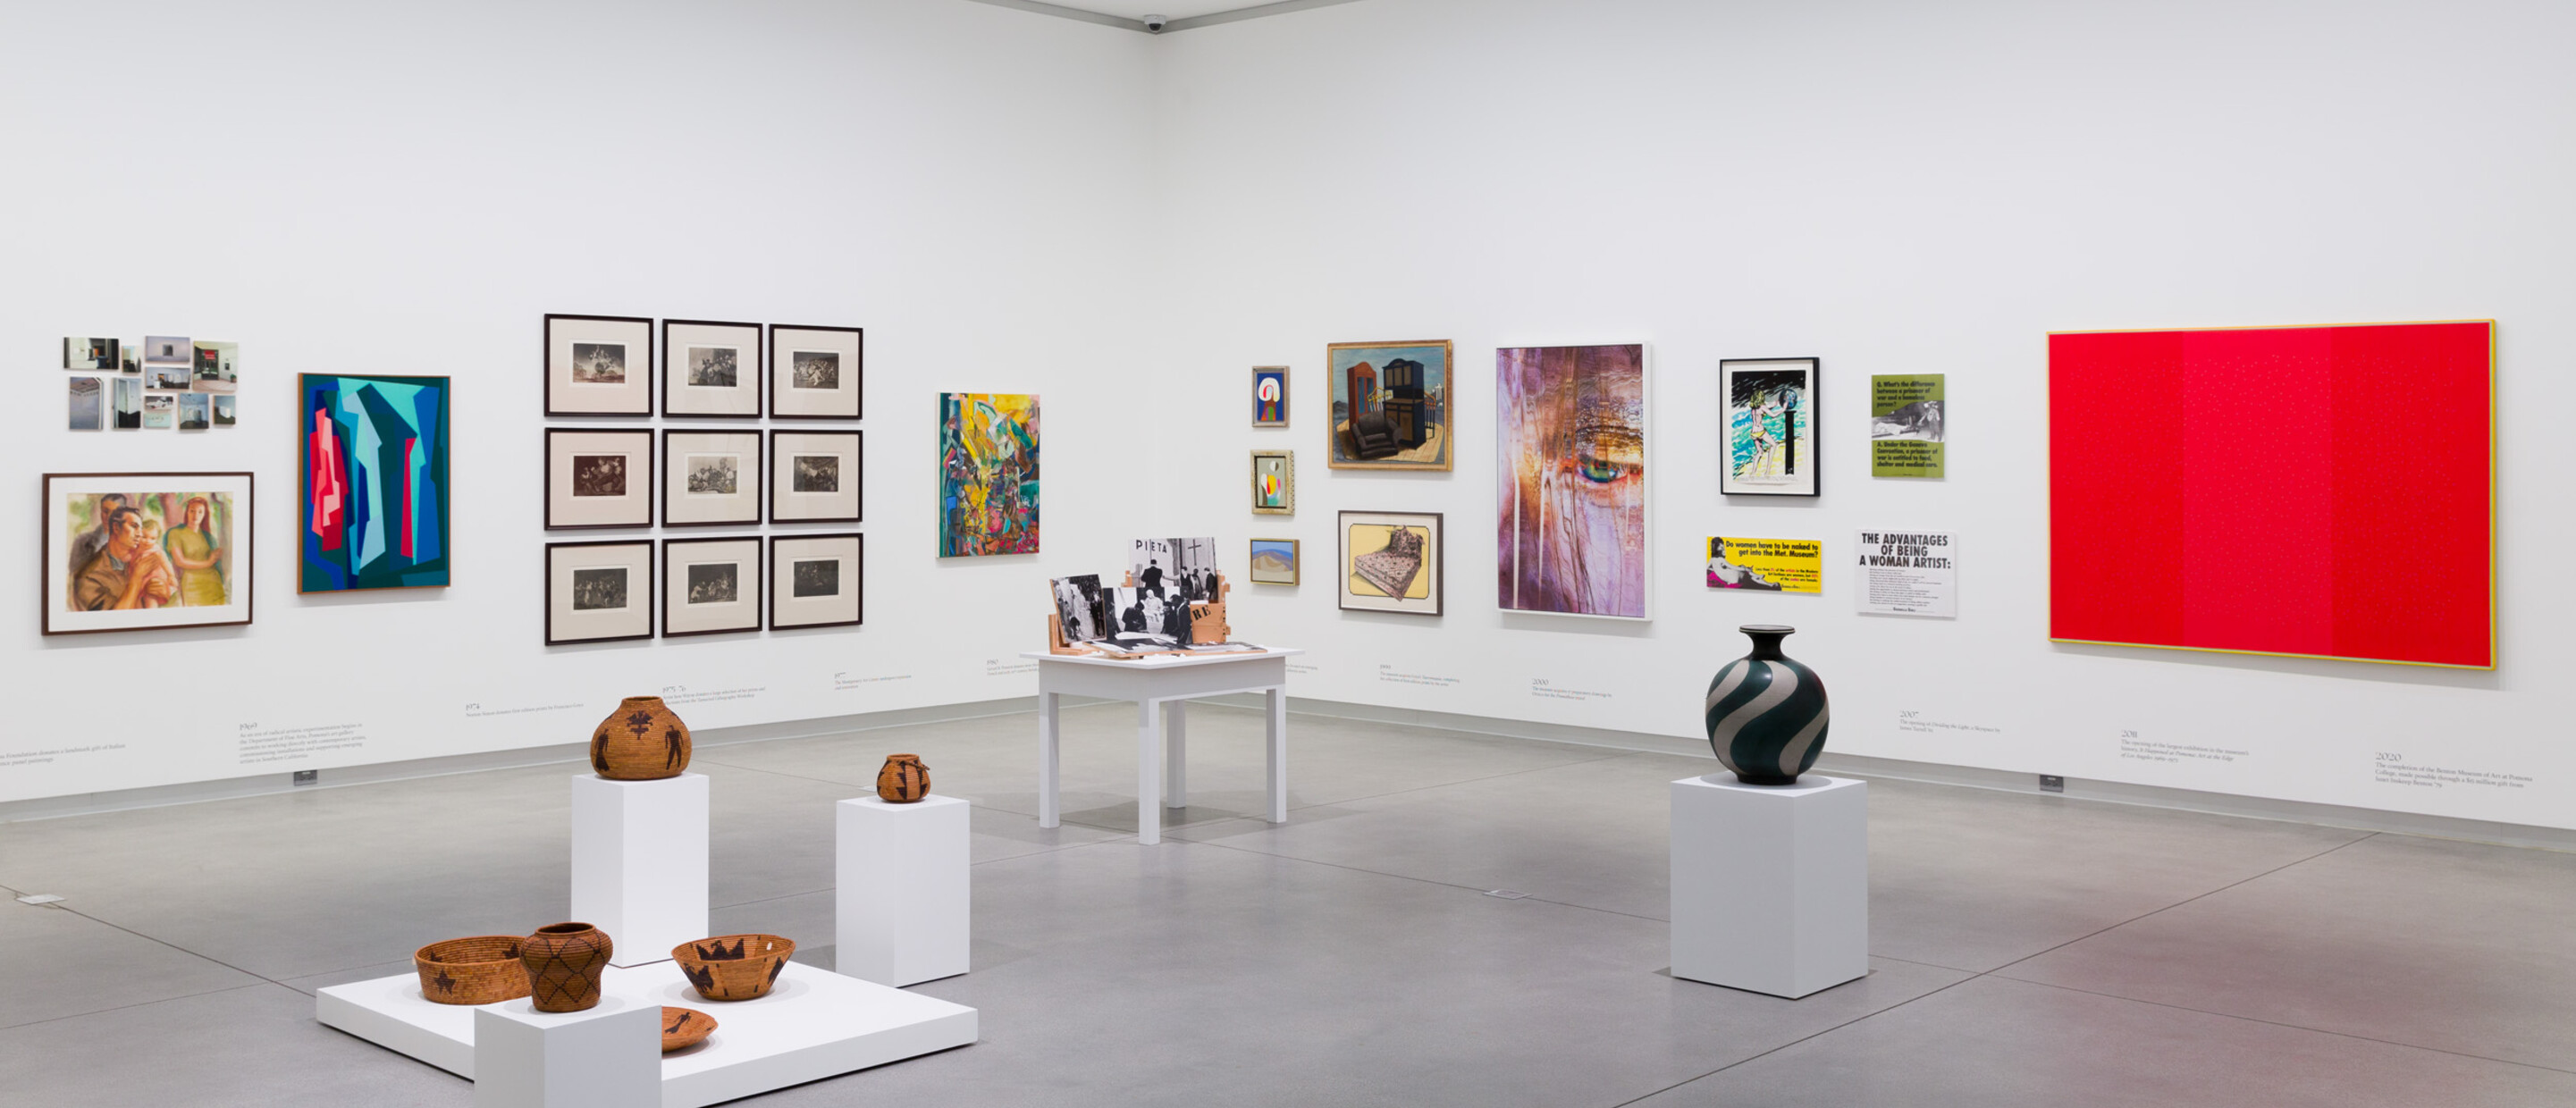 Works of art on pedestals and installed on gallery walls